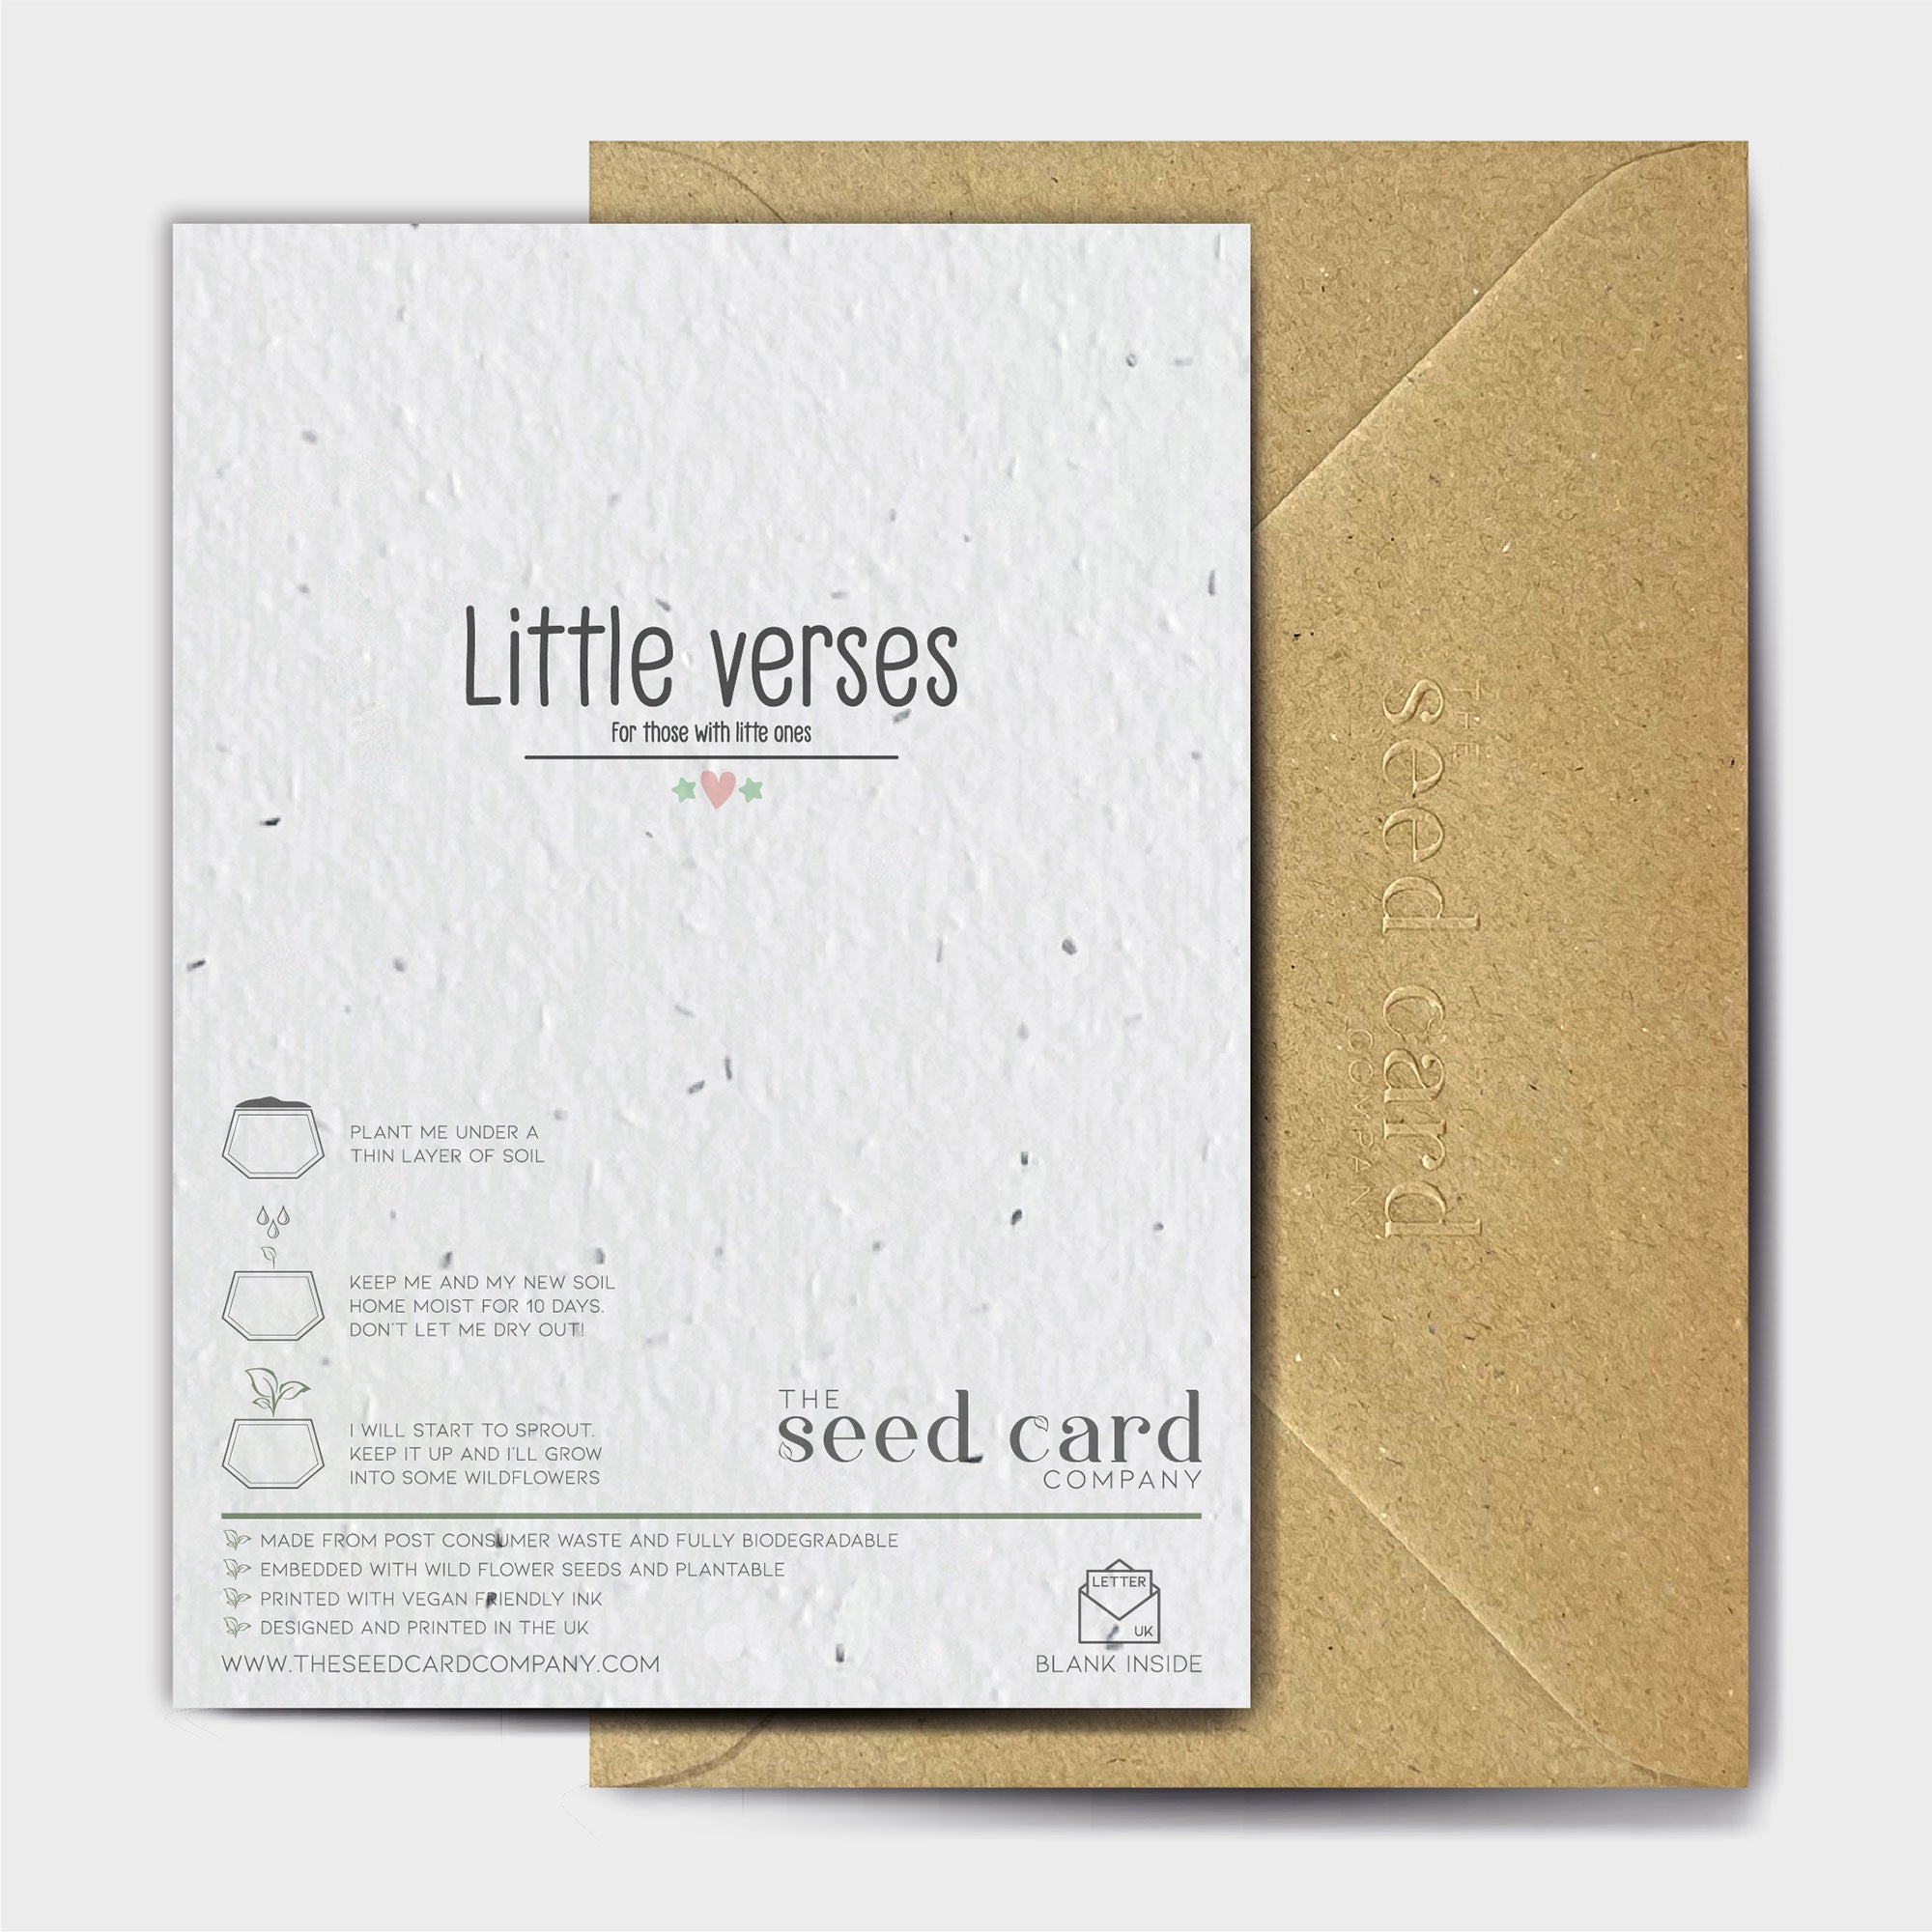 Shop online Wind One Up - 100% biodegradable seed-embedded cards Shop -The Seed Card Company